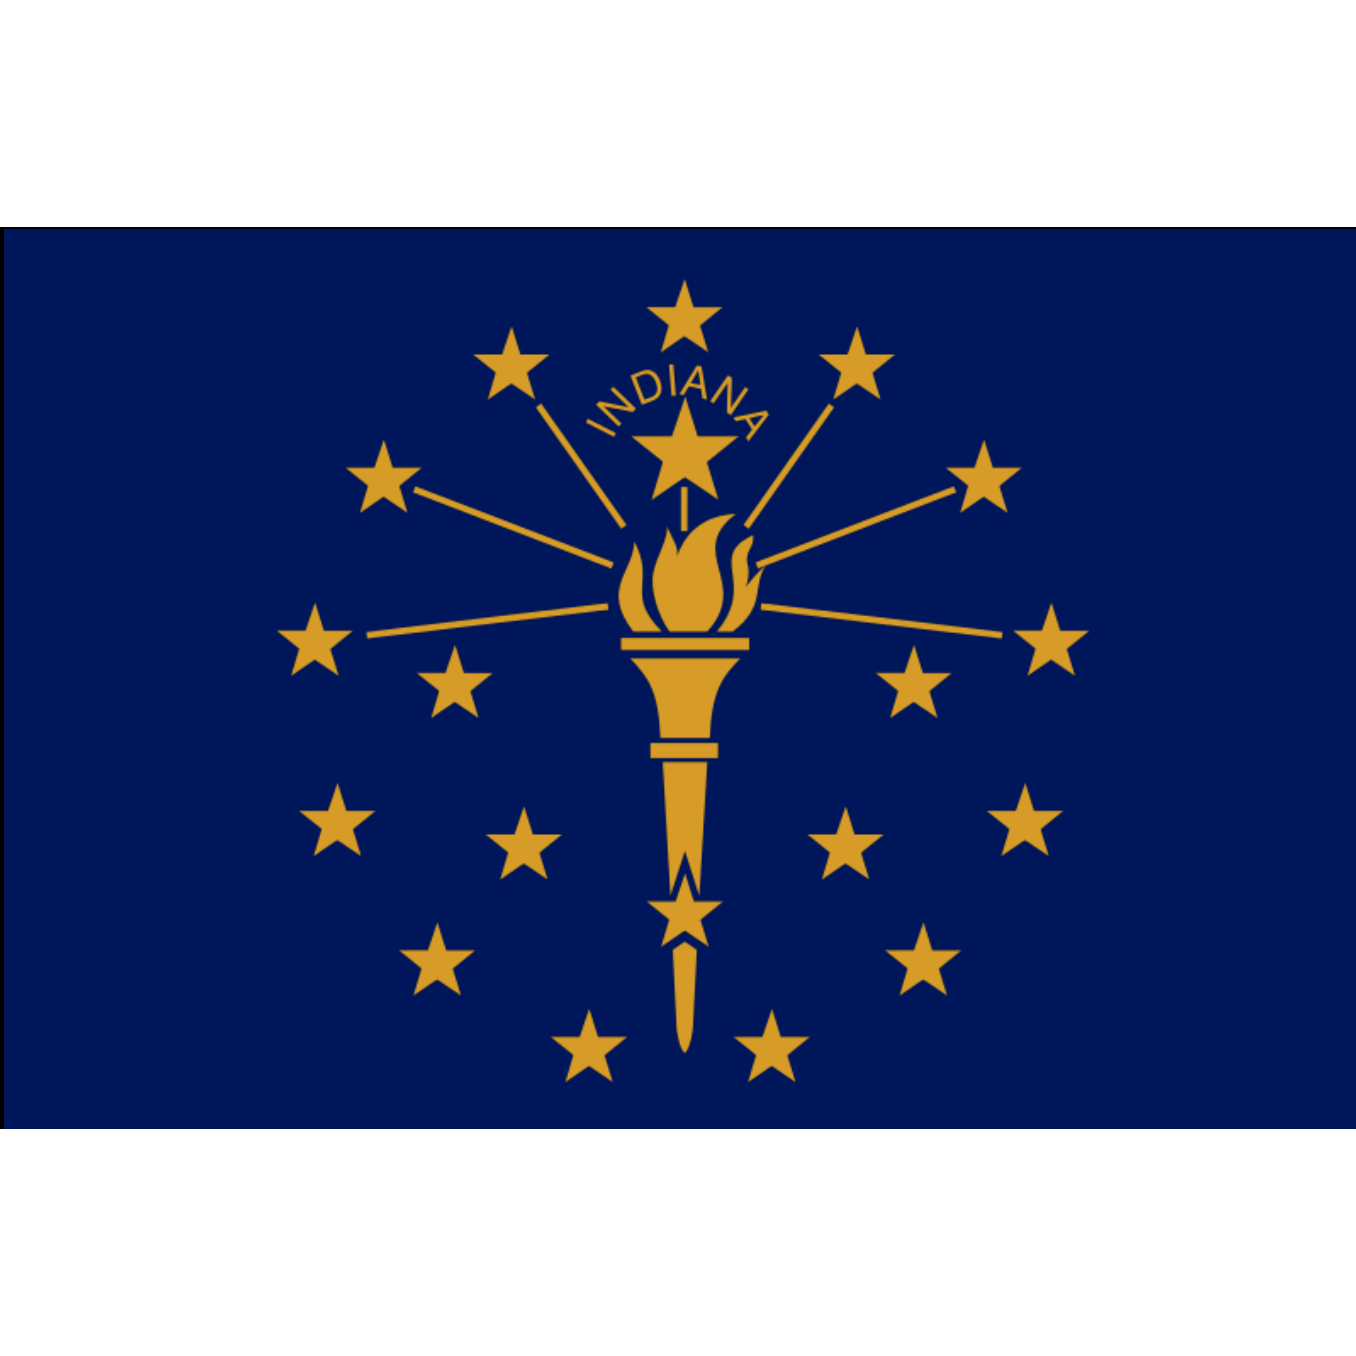 State of Indiana - The Custom Windsock Co.